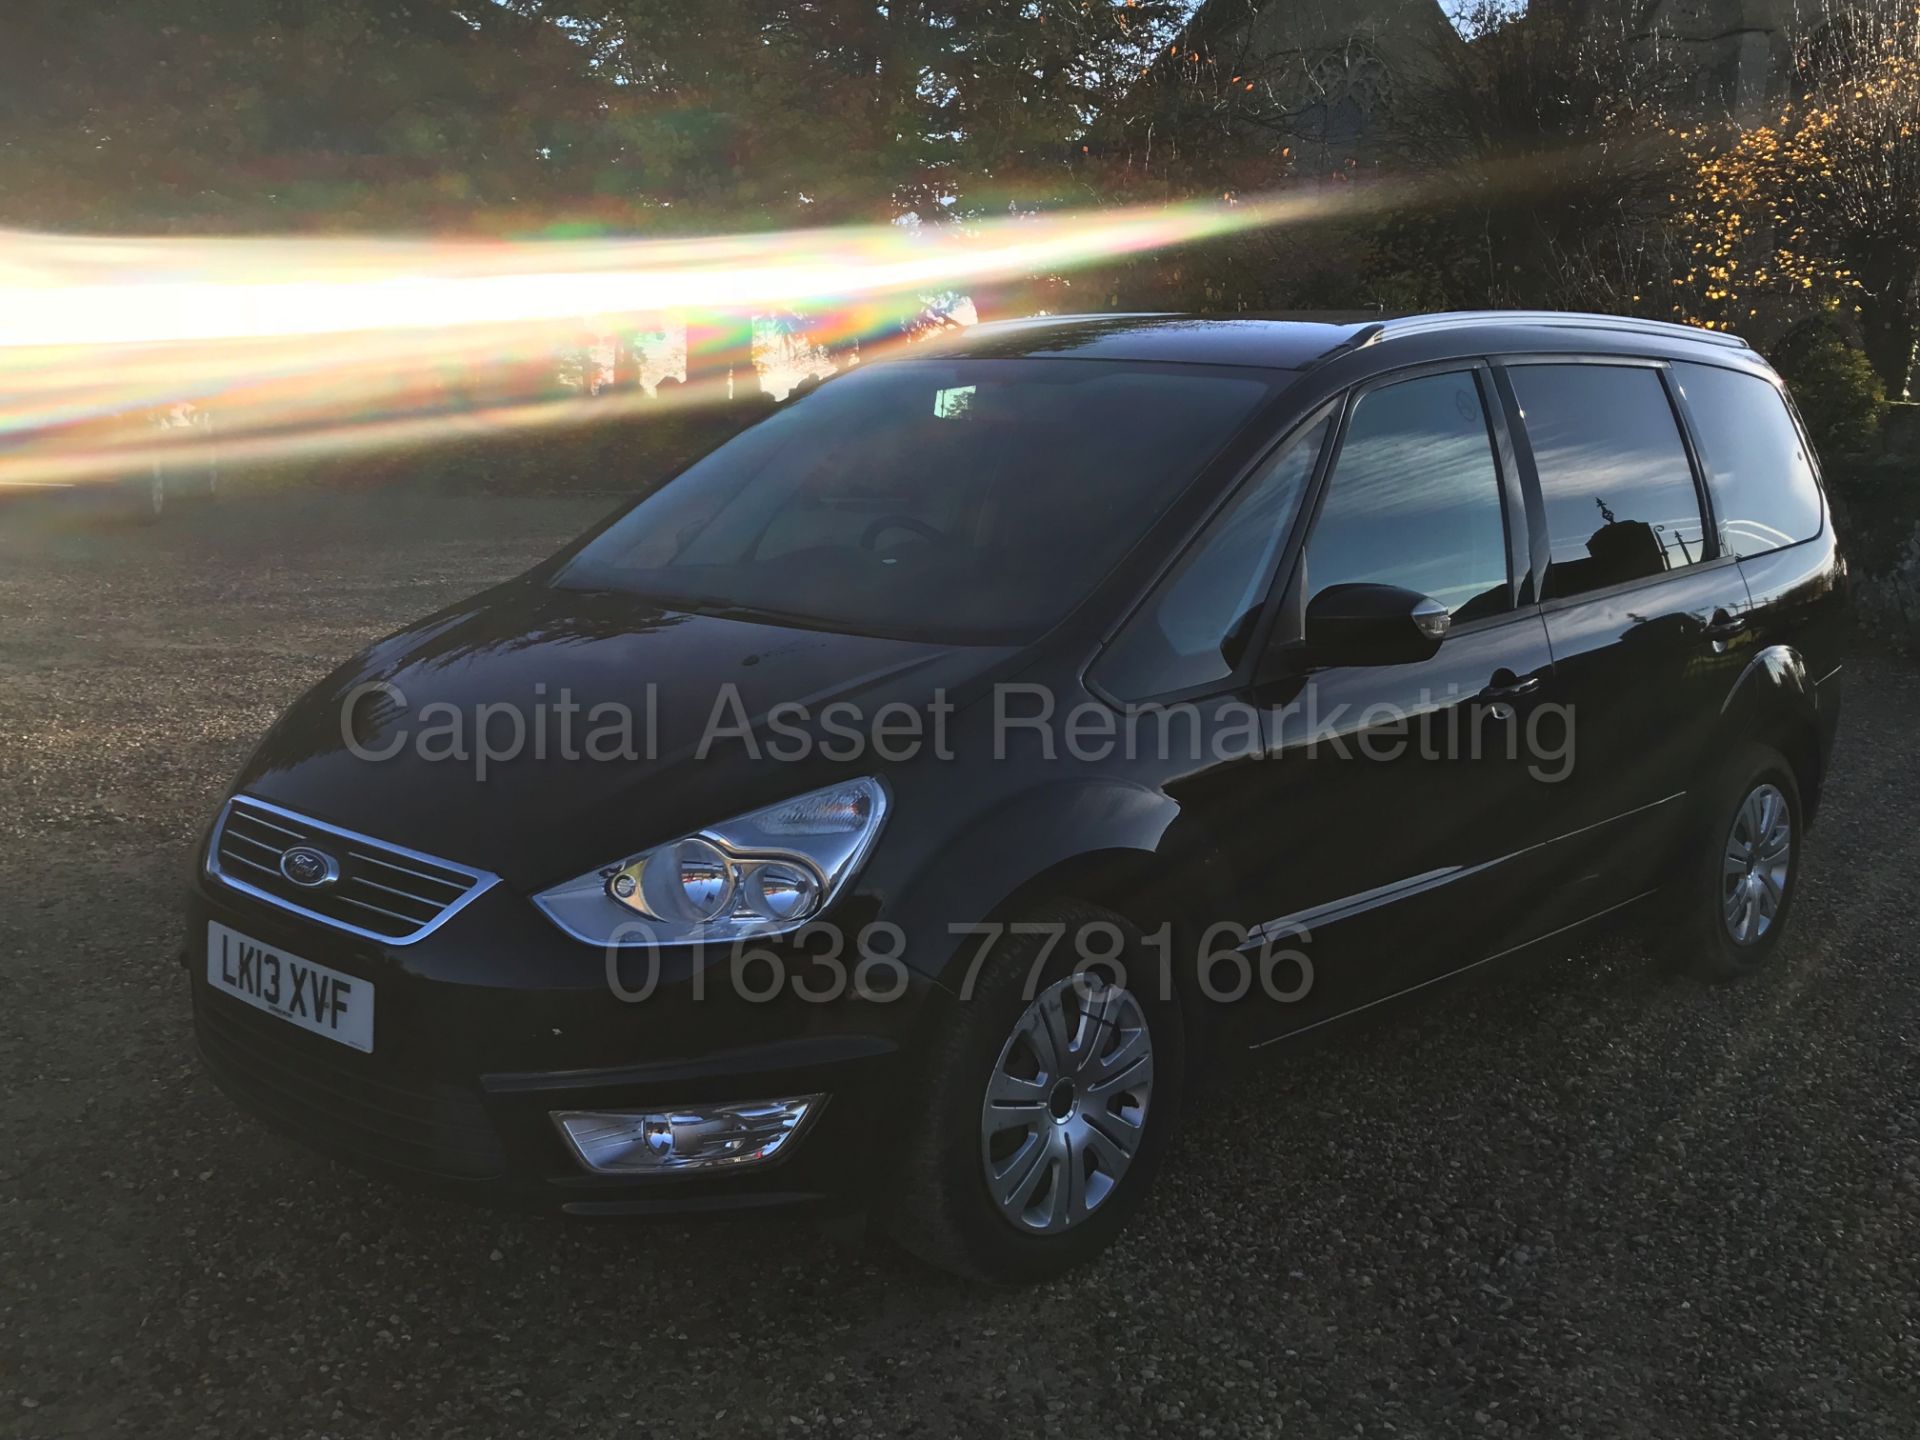 (On Sale) FORD GALAXY 'ZETEC' 7 SEATER MPV (2013) '2.0 TDCI -140 BHP' (1 OWNER) *FULL HISTORY* - Image 6 of 29